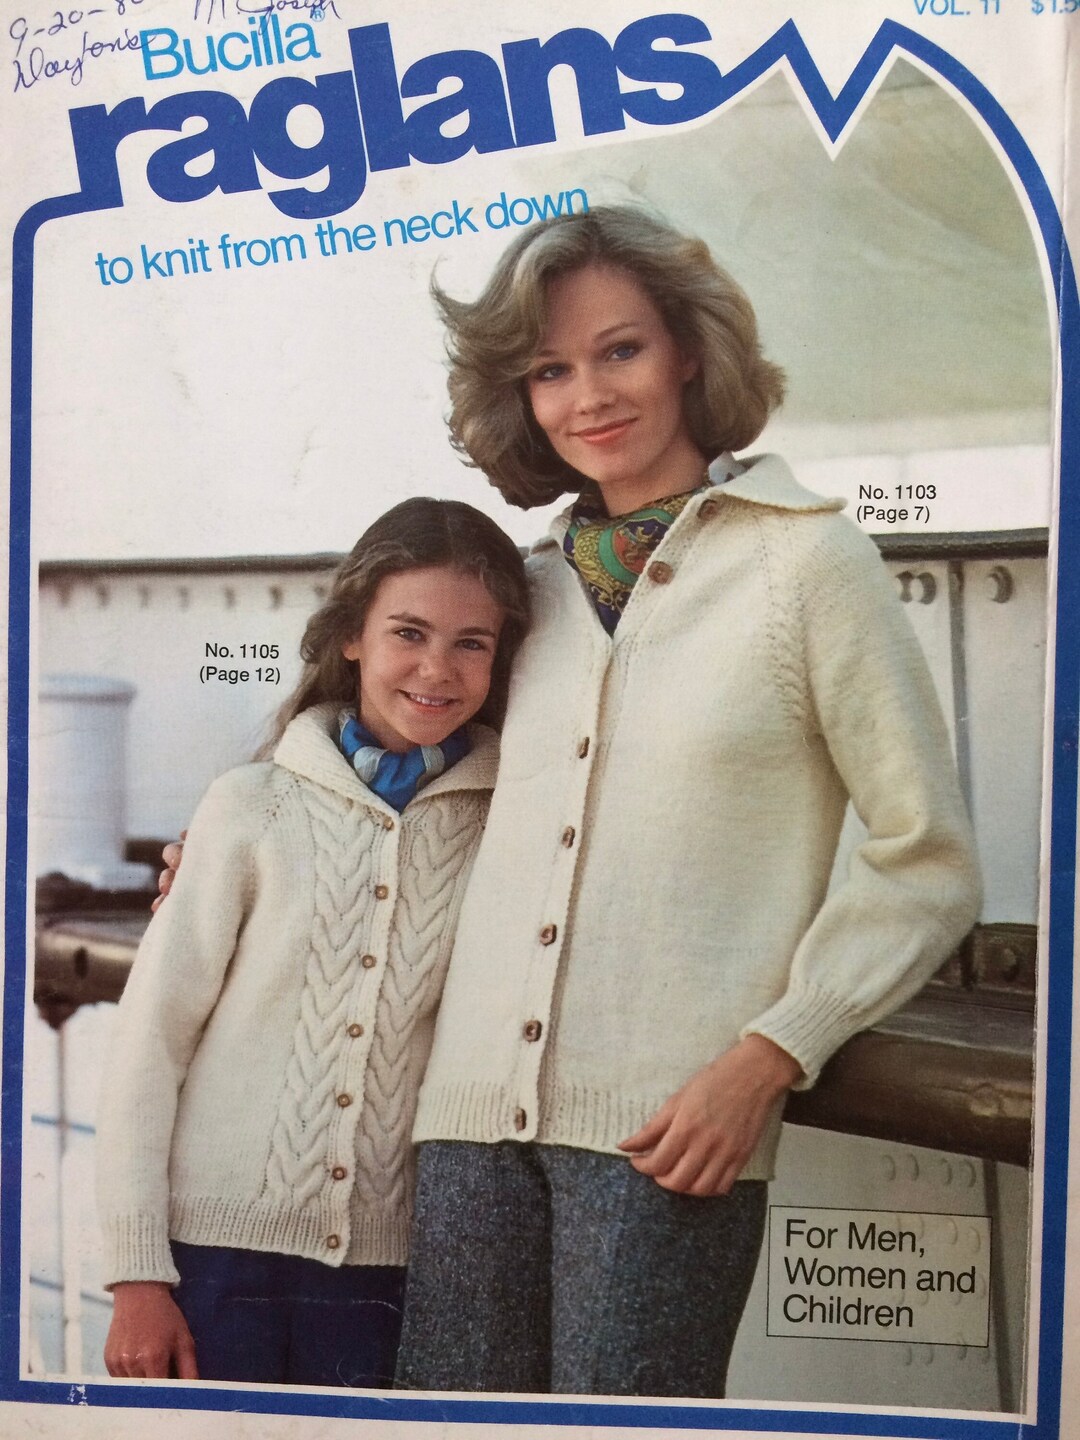 Bucilla Raglans to Knit From the Neck Down Vol 11 1977 - Etsy